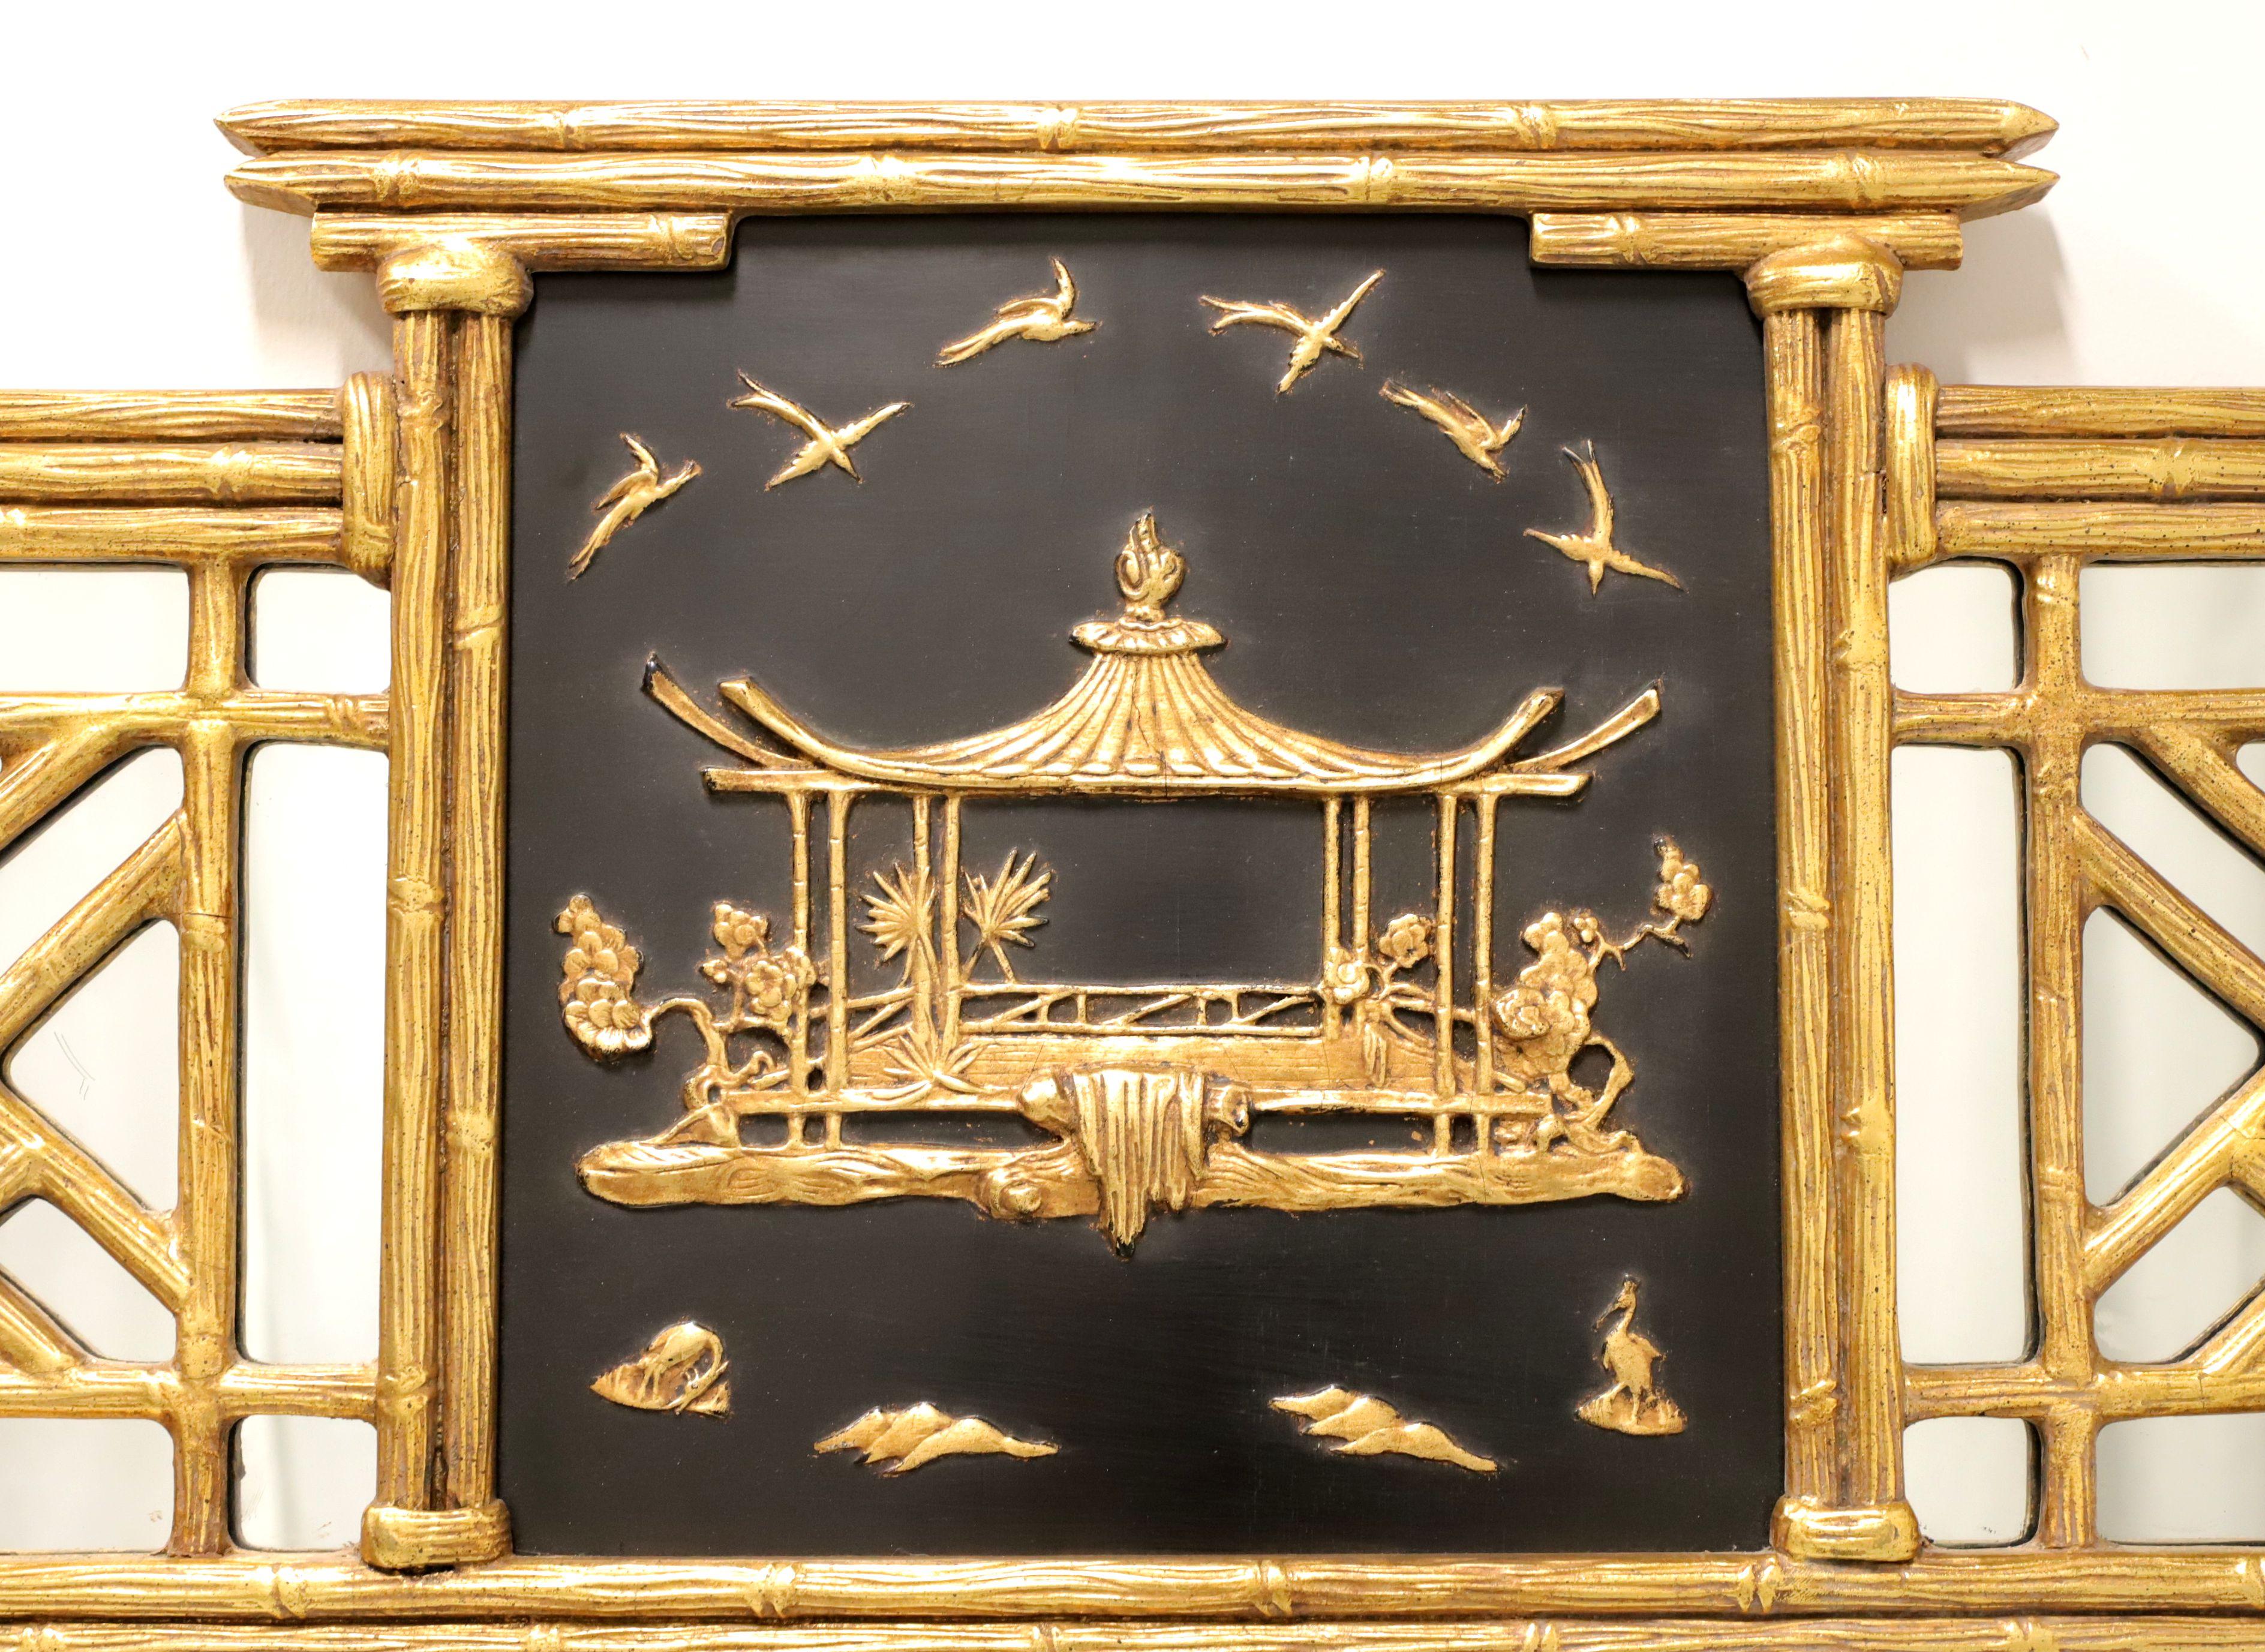 Anglo-Japanese FRIEDMAN BROTHERS Gold Gilt Faux Bamboo Japanese Pagoda Mirror For Sale